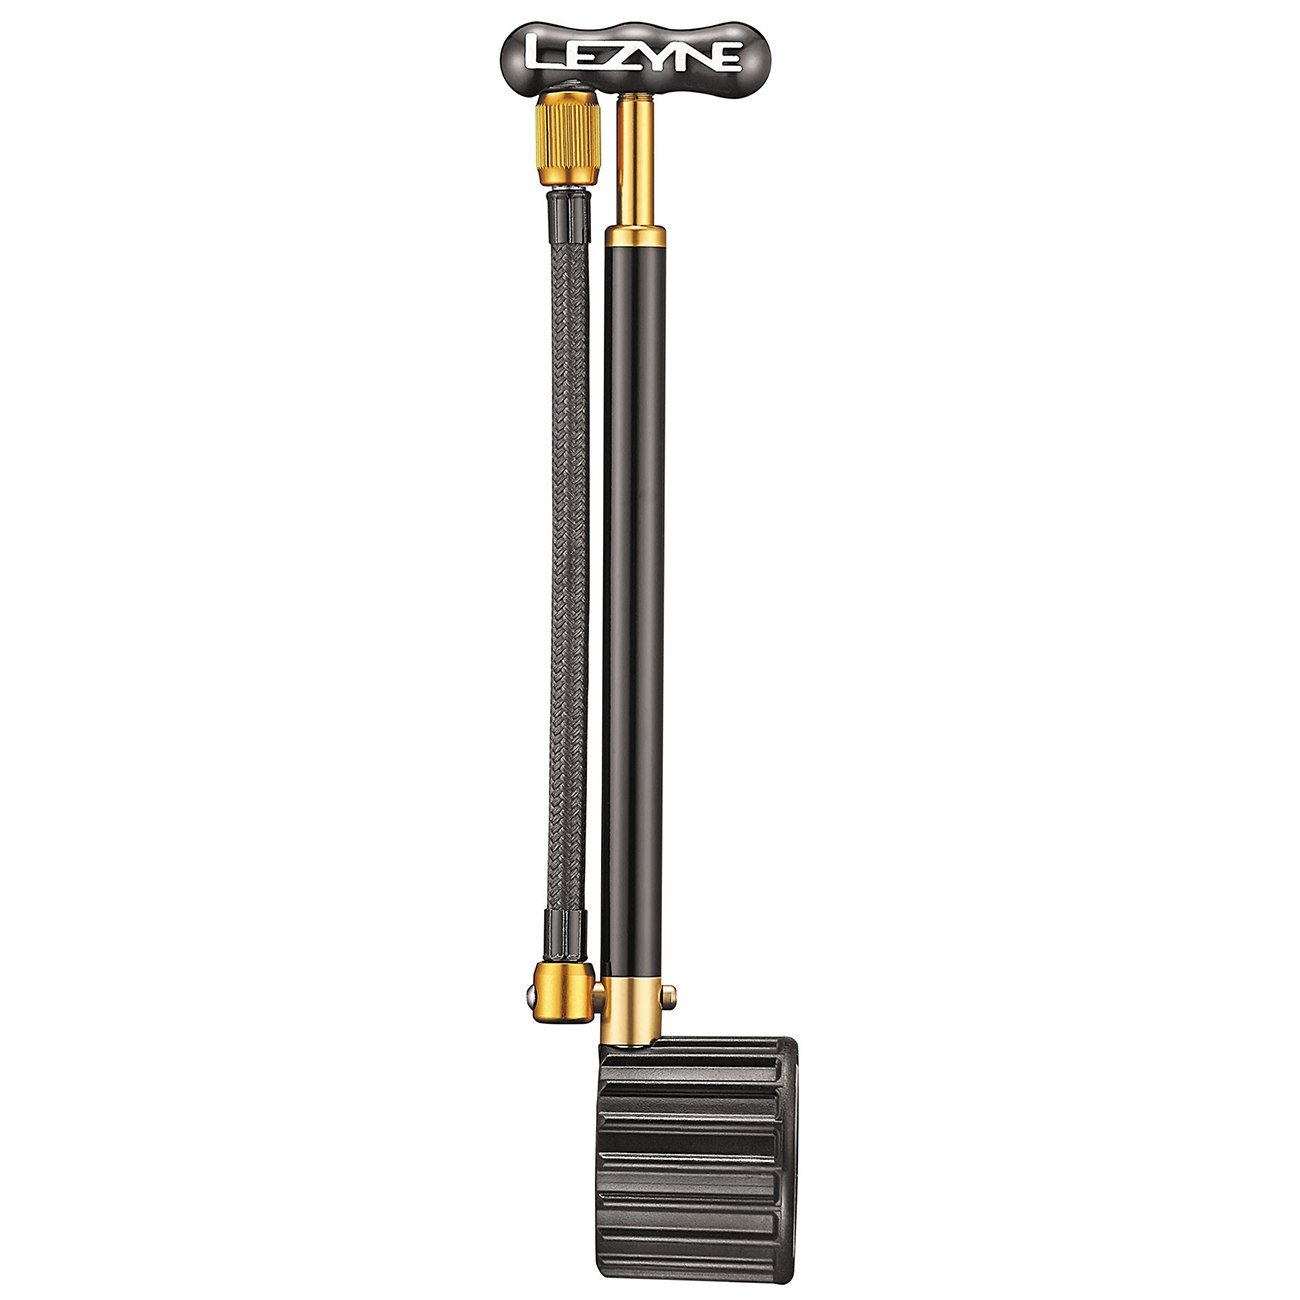 Picture of Lezyne Shock Drive Shock Pump - black